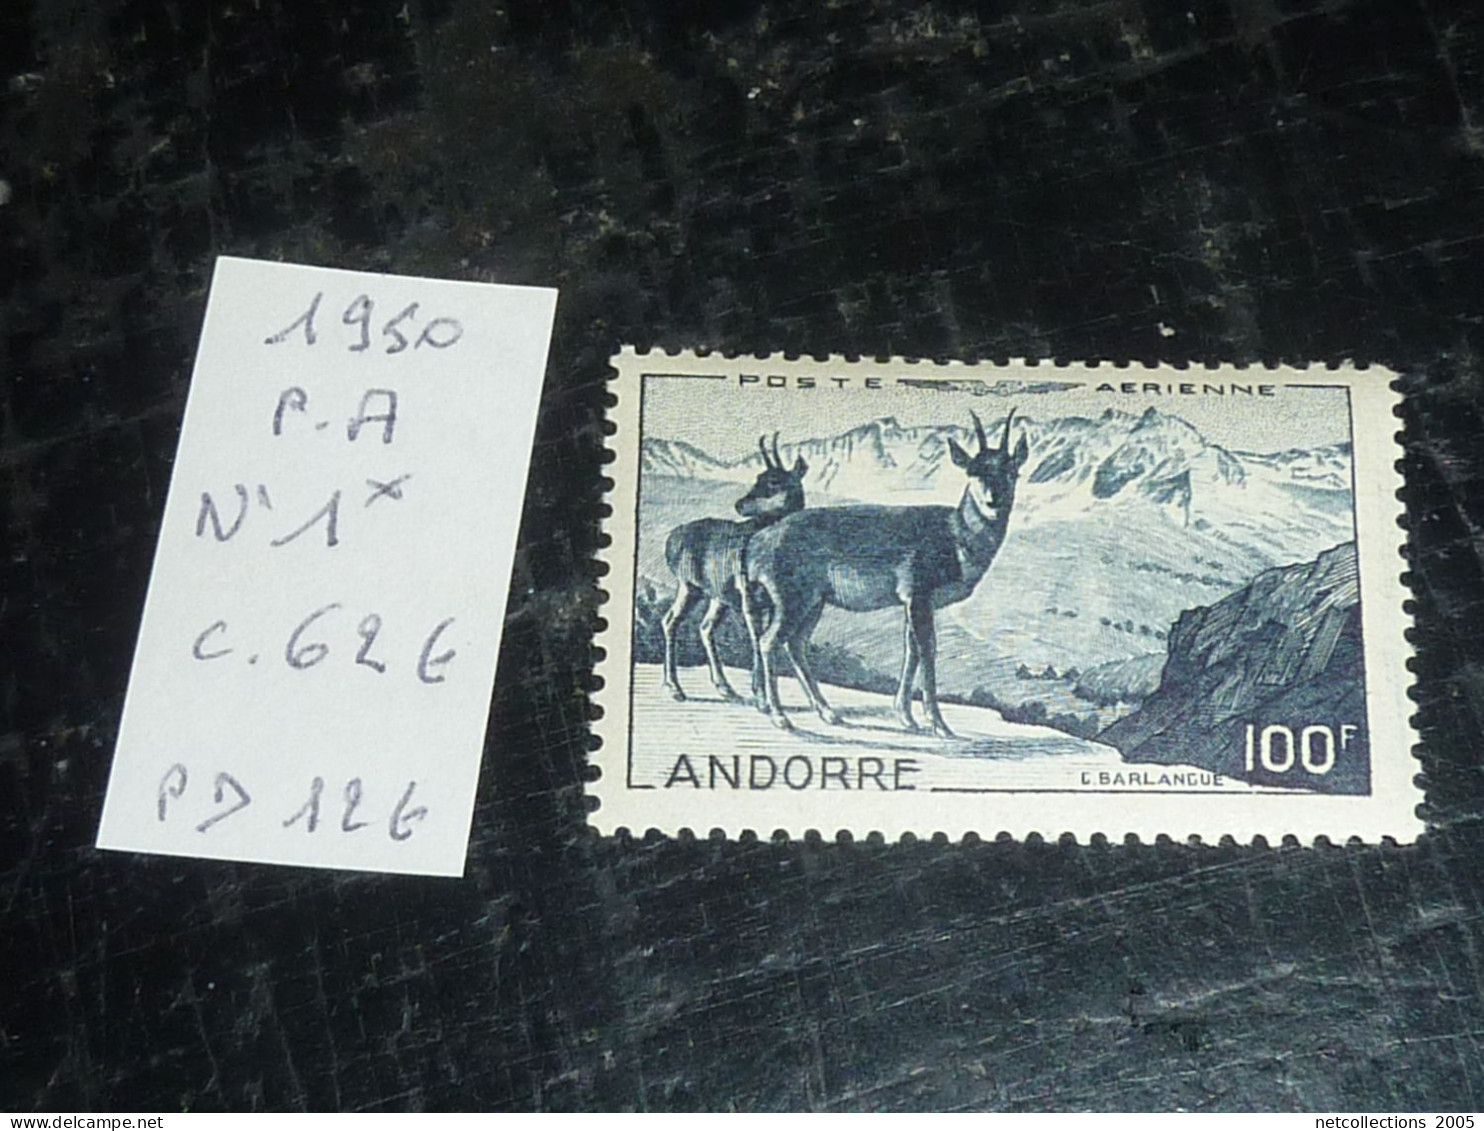 ANDORRE TIMBRE POSTE AERIENNE 1950 N°1 - NEUFS AVEC CHARNIERES (20/09) - Airmail